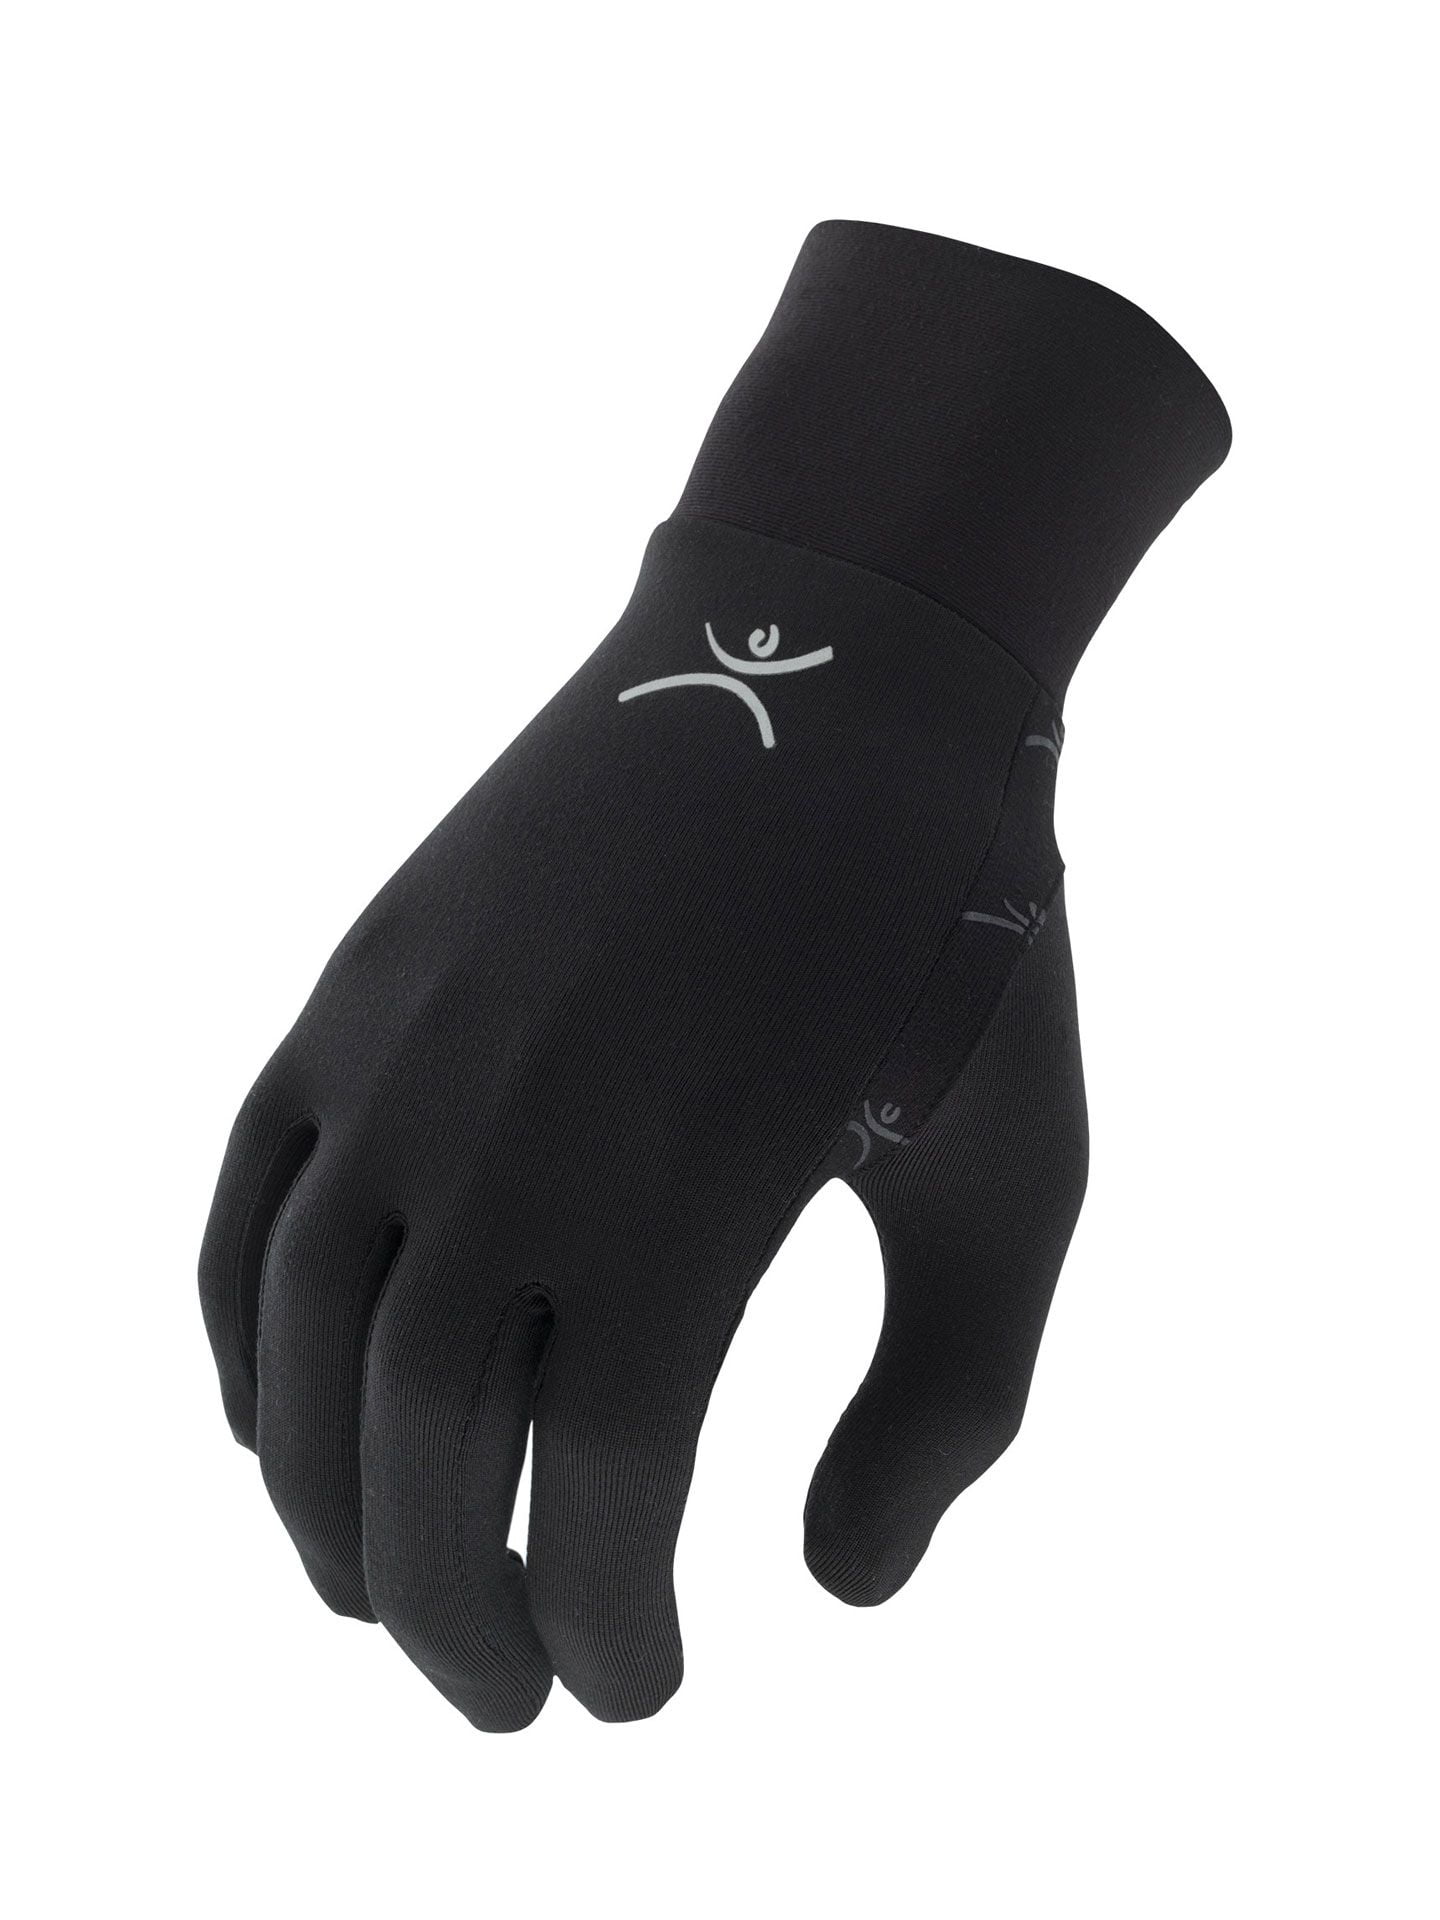 *NEW* Steiner Silk & Spandex Gloves  Adults Thermal Base Layer  One Size  Black 